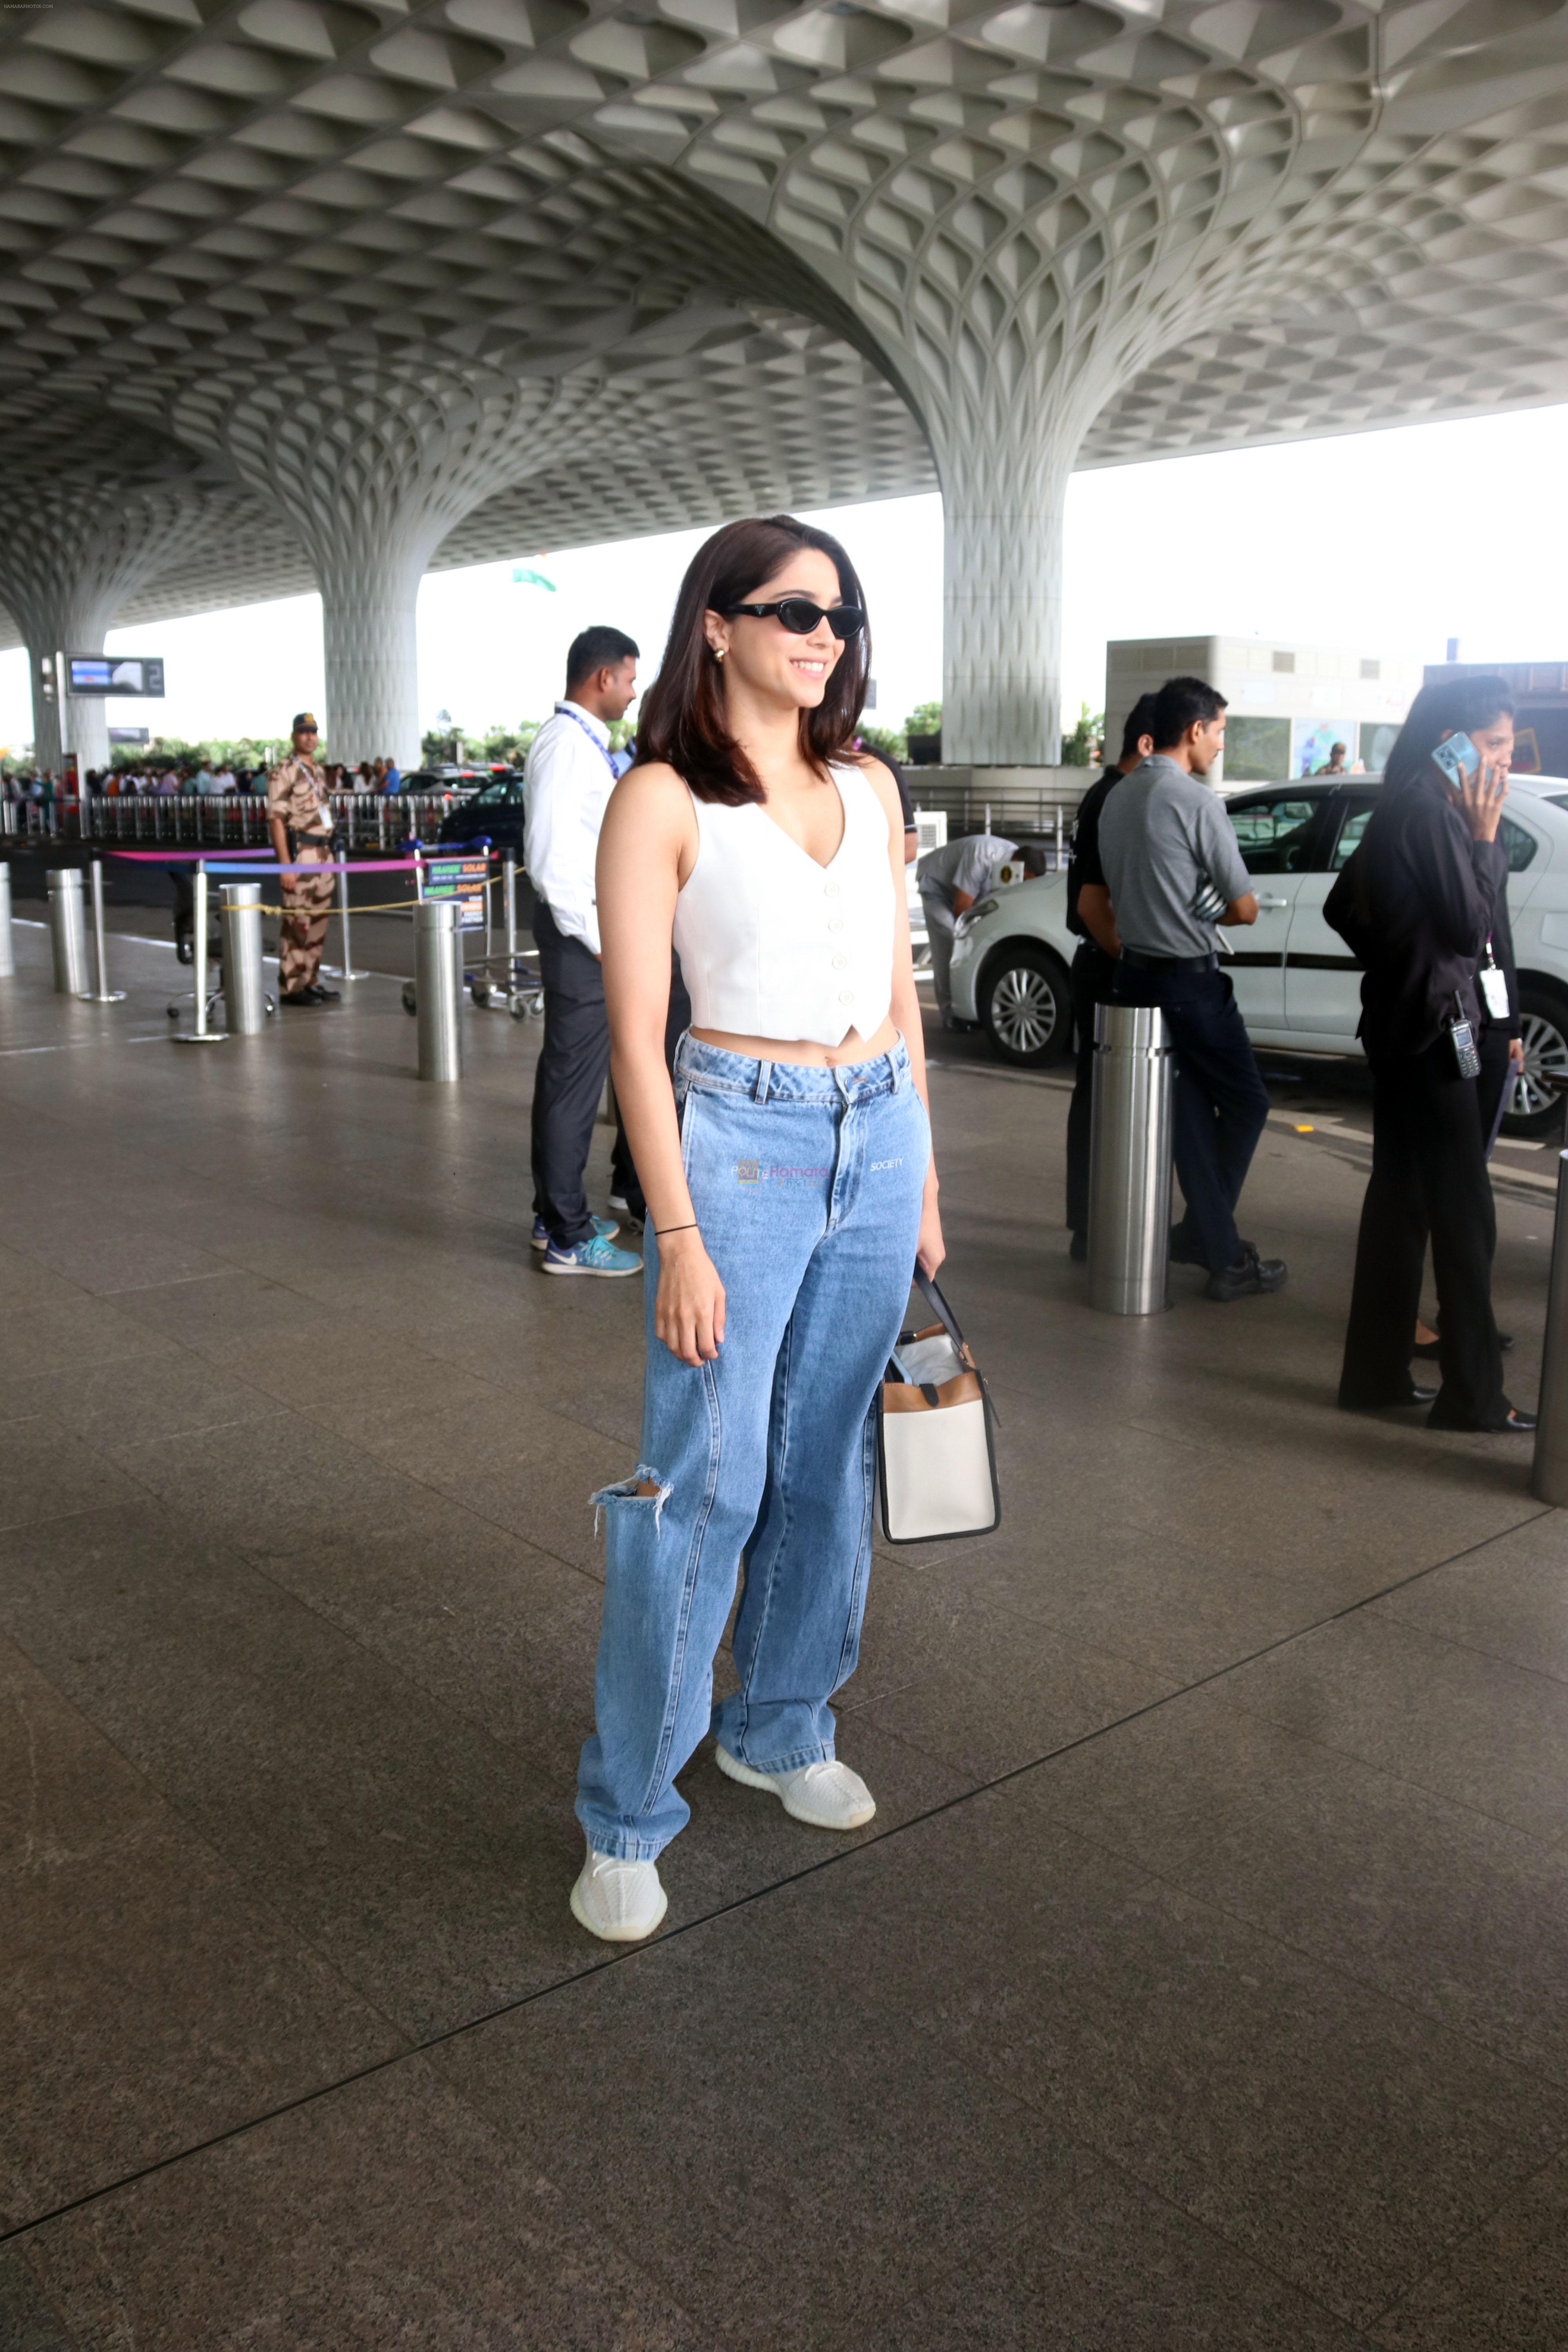 Sharvari Wagh dressed in white sleeveless top and blue jeans seen at the airport on 11 July 2023